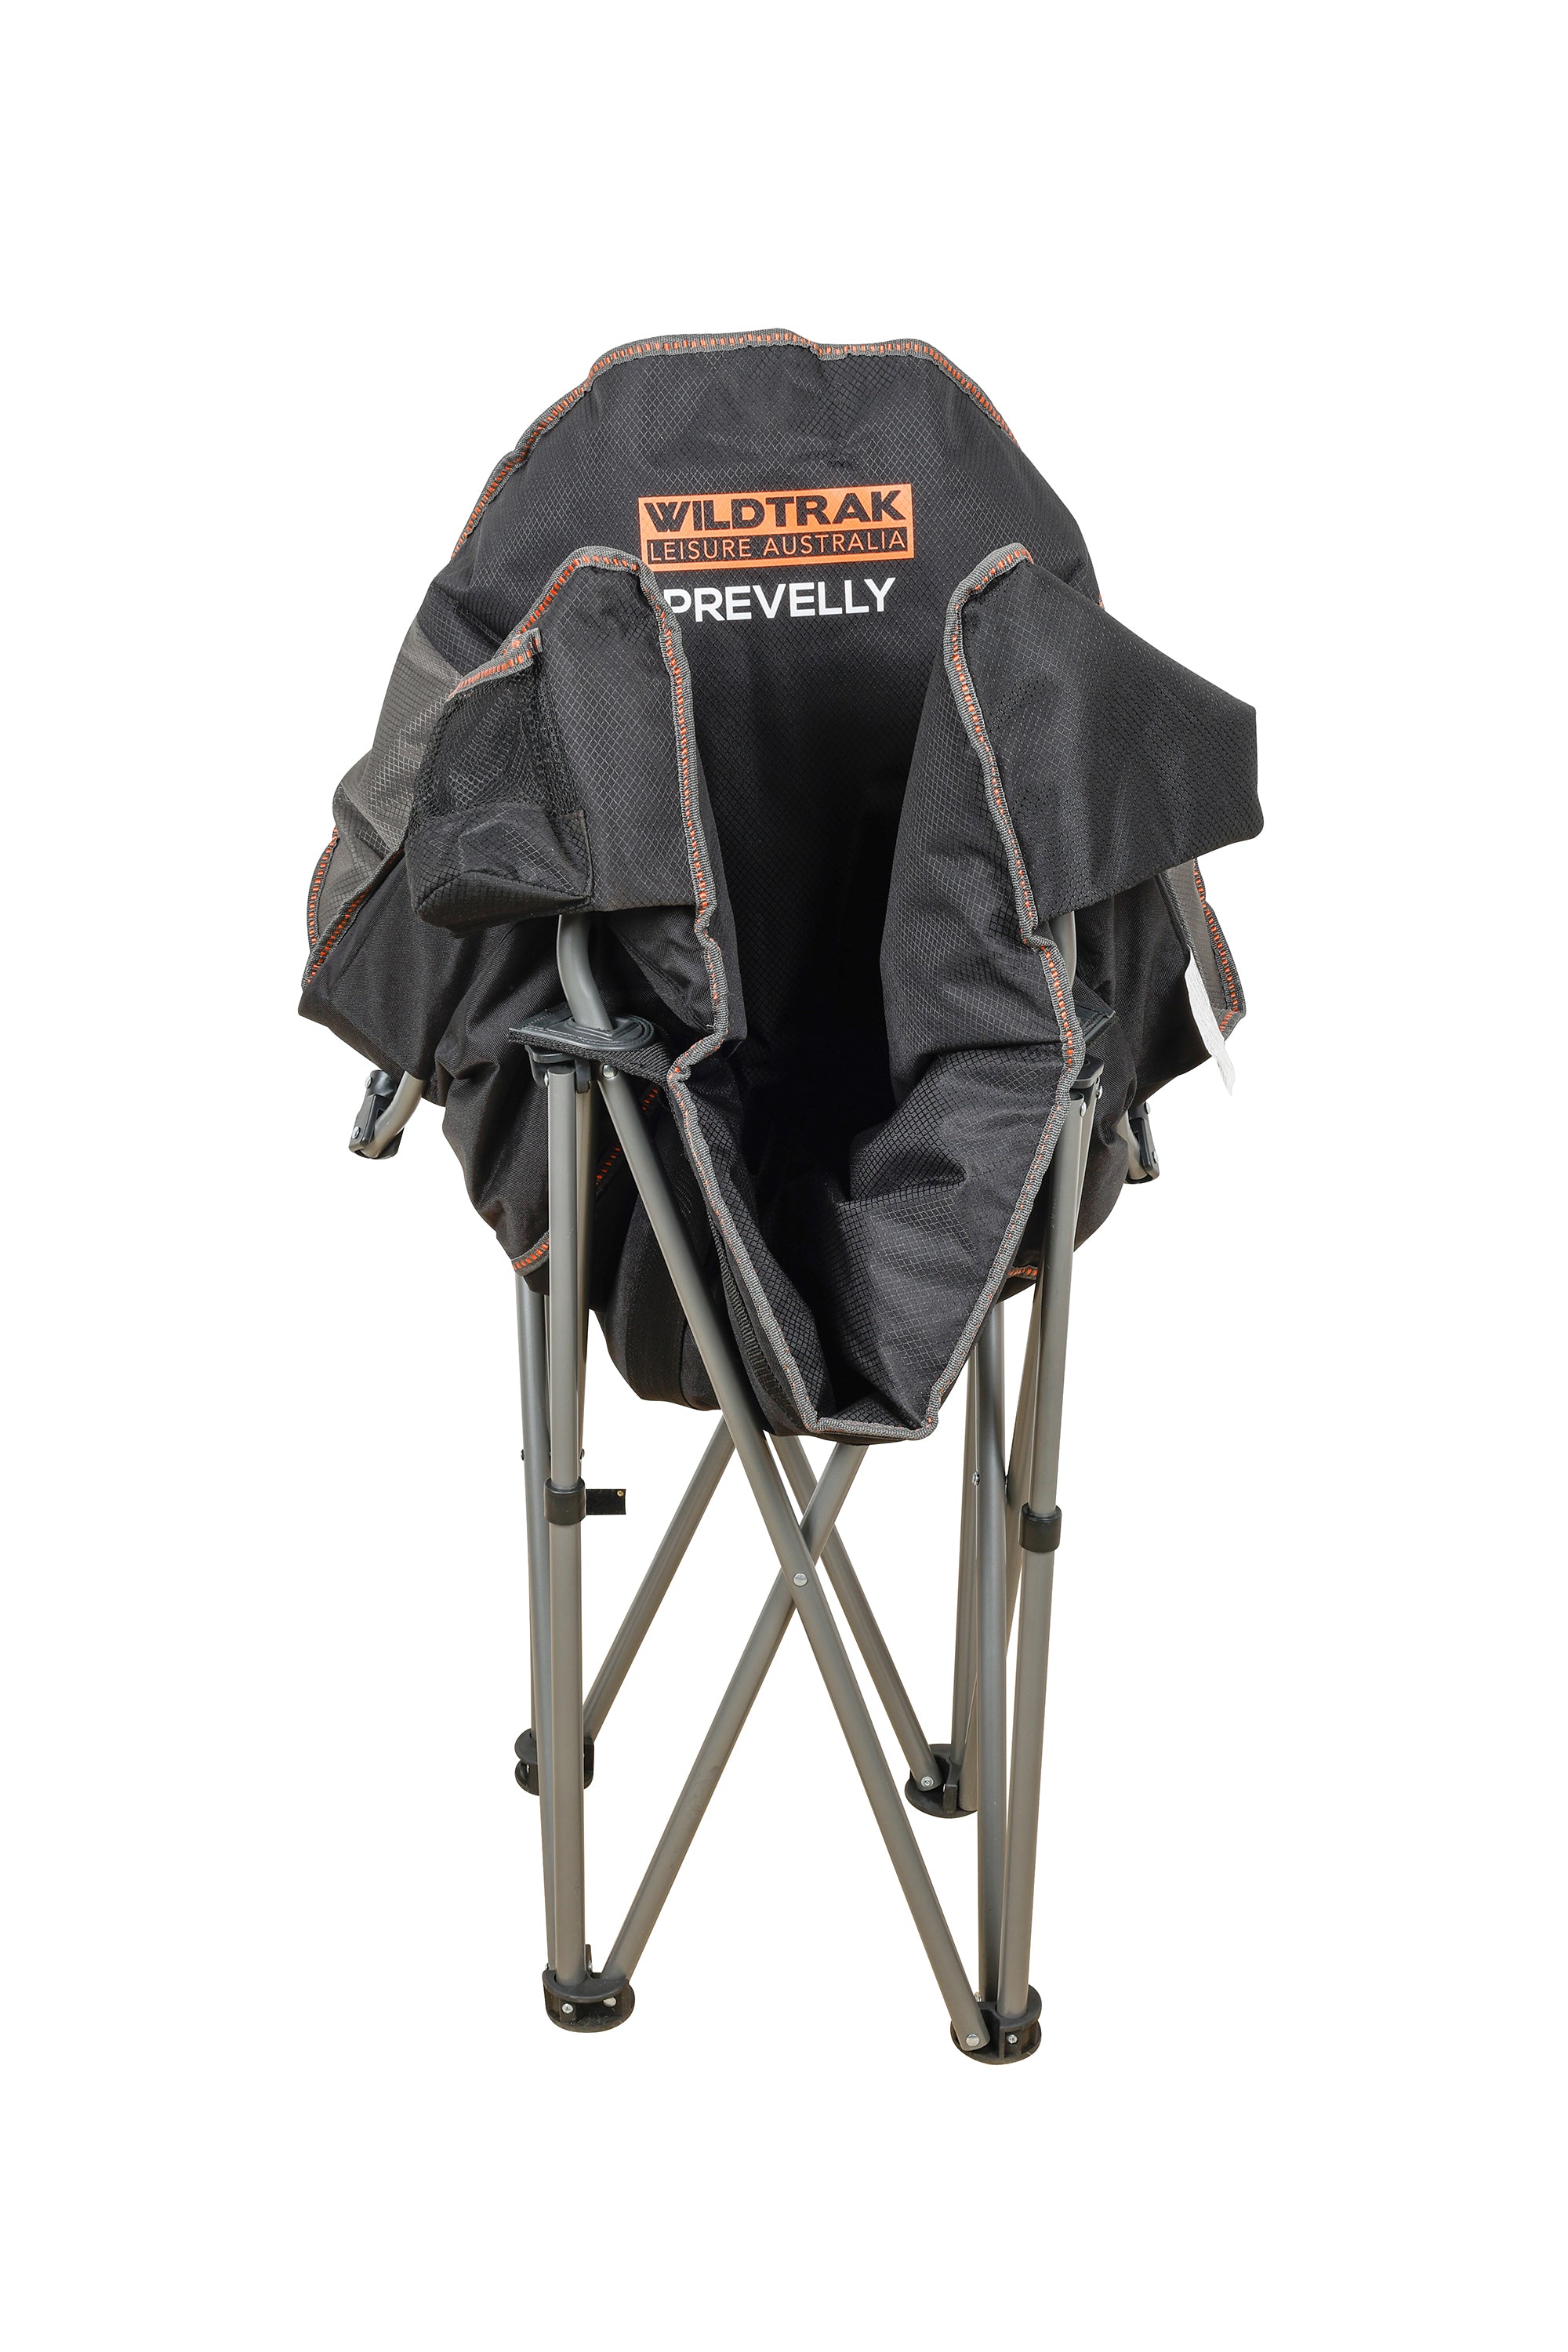 PREVELLY DELUXE CAMP CHAIR WITH CARRY STRAP